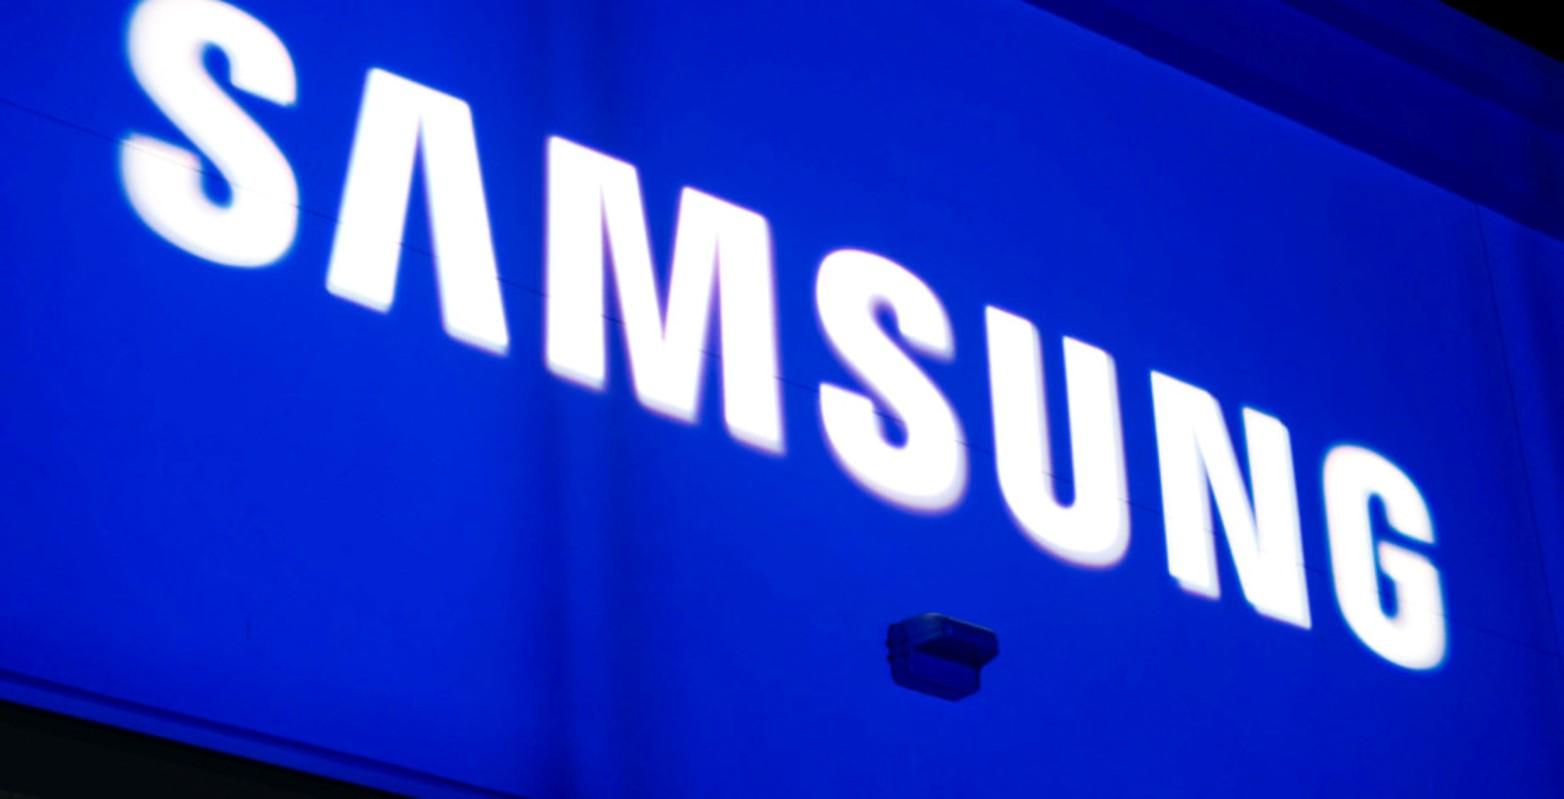 Samsung may discontinue high-end Galaxy Note smartphones – sources